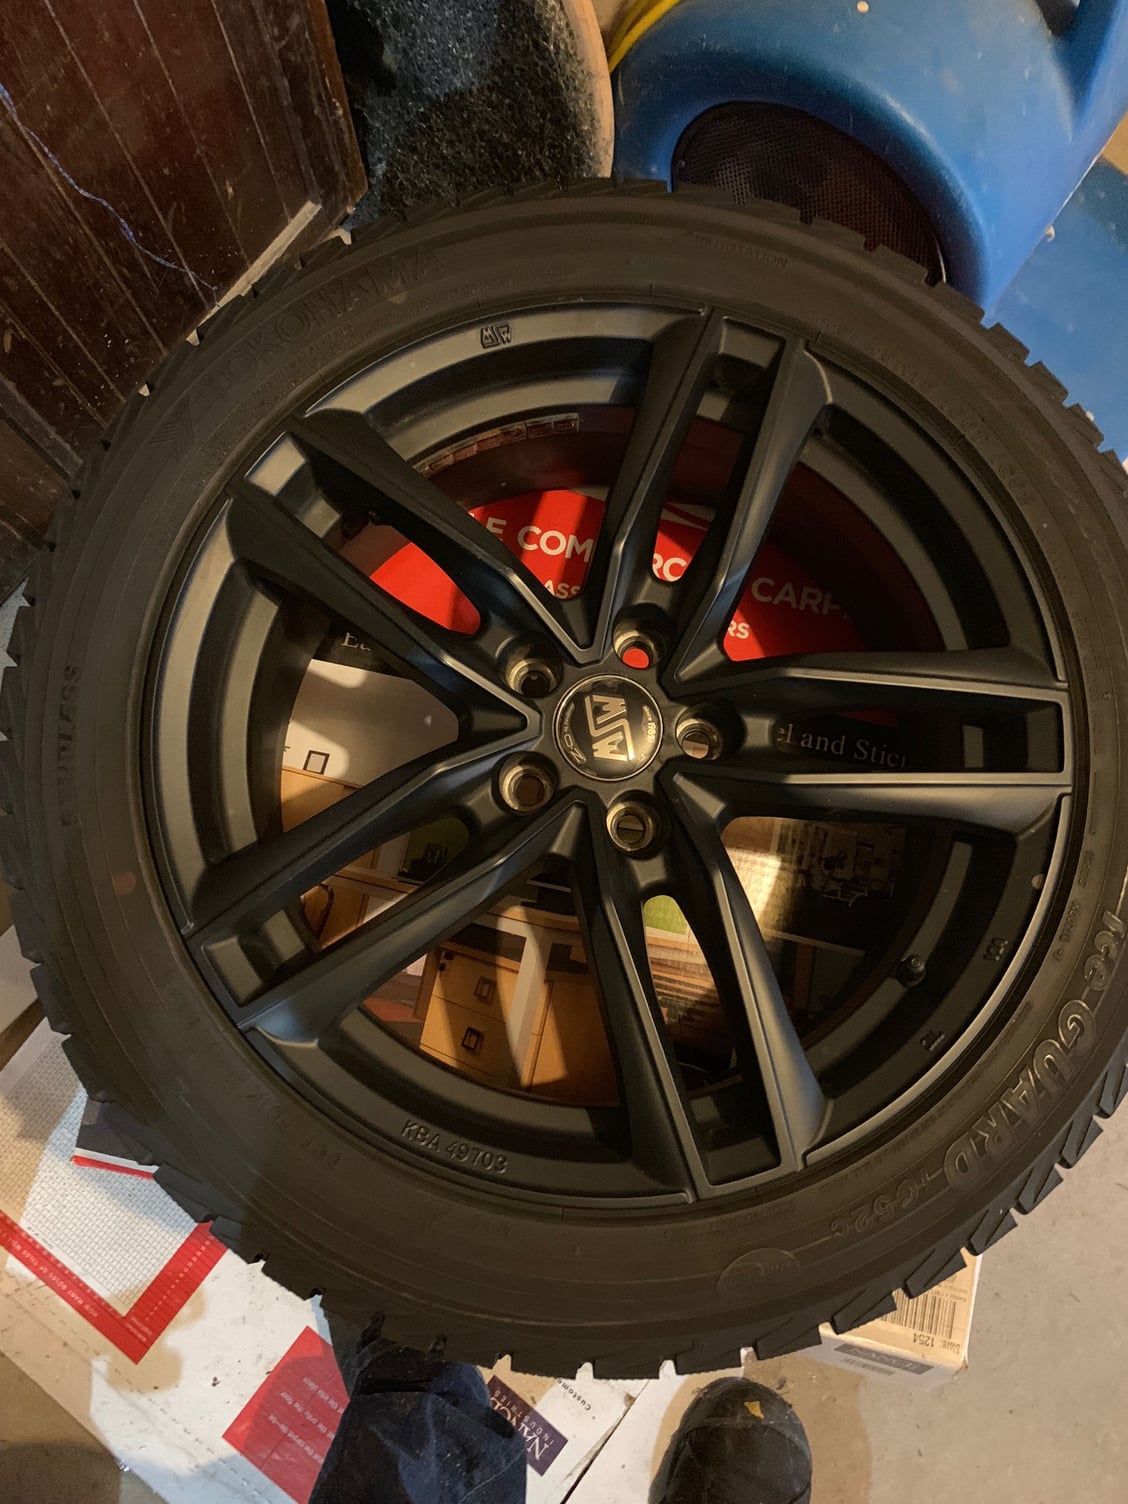 Wheels and Tires/Axles - XF Winter rims and tires - Used - 2009 to 2014 Jaguar XF - Syracuse, NY 13211, United States